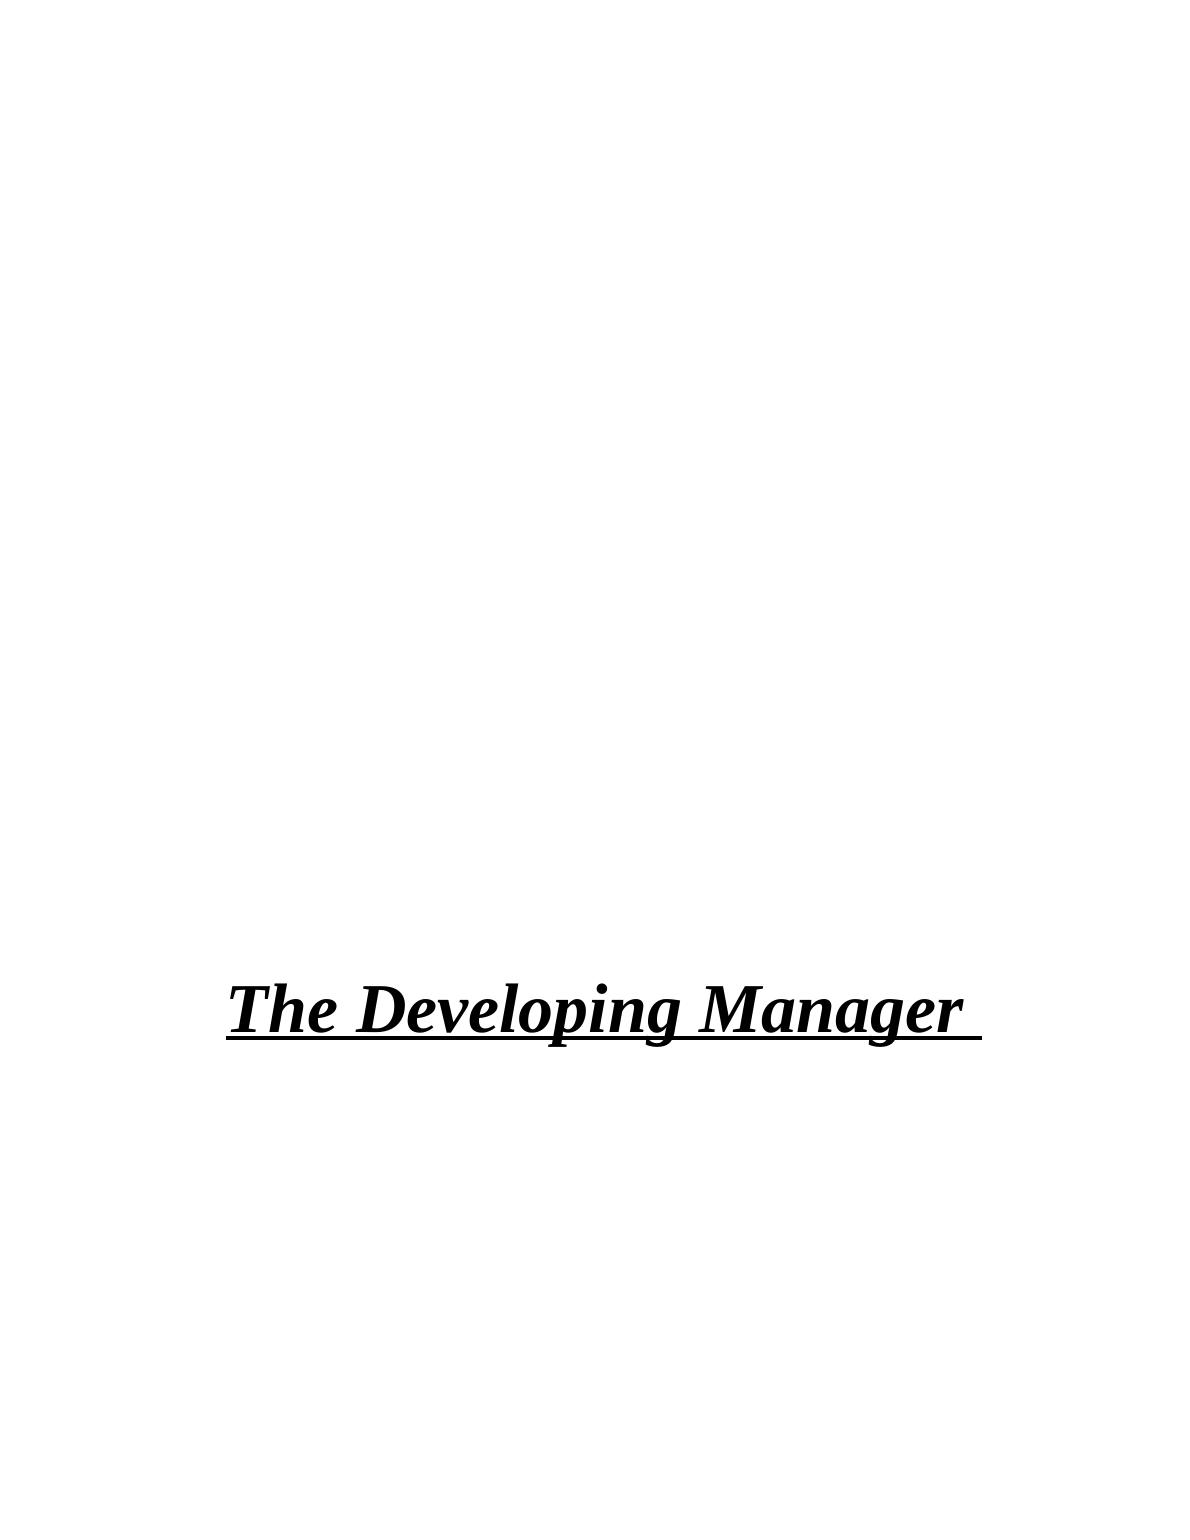 Project on Developing Manager - Hilton Hotels_1